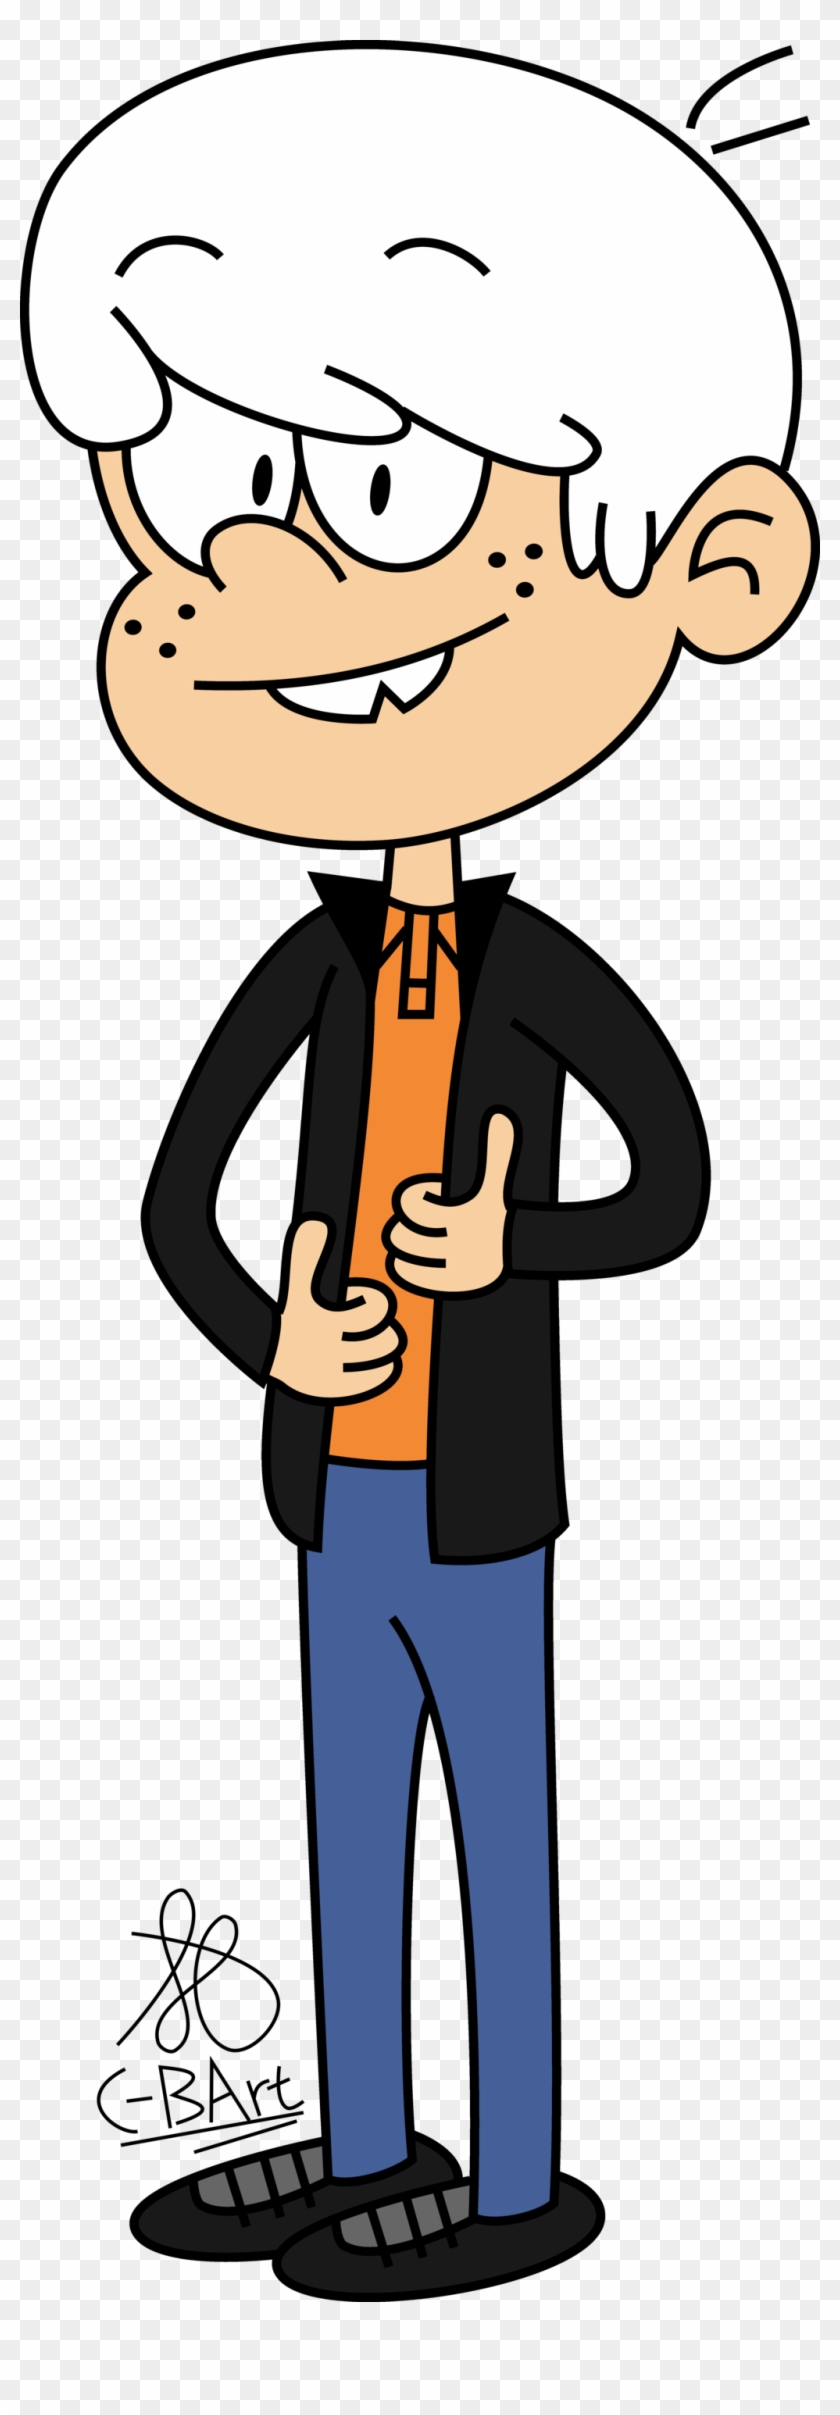 Lincoln Loud By C-bart - Lincoln Loud As A Teen #580993